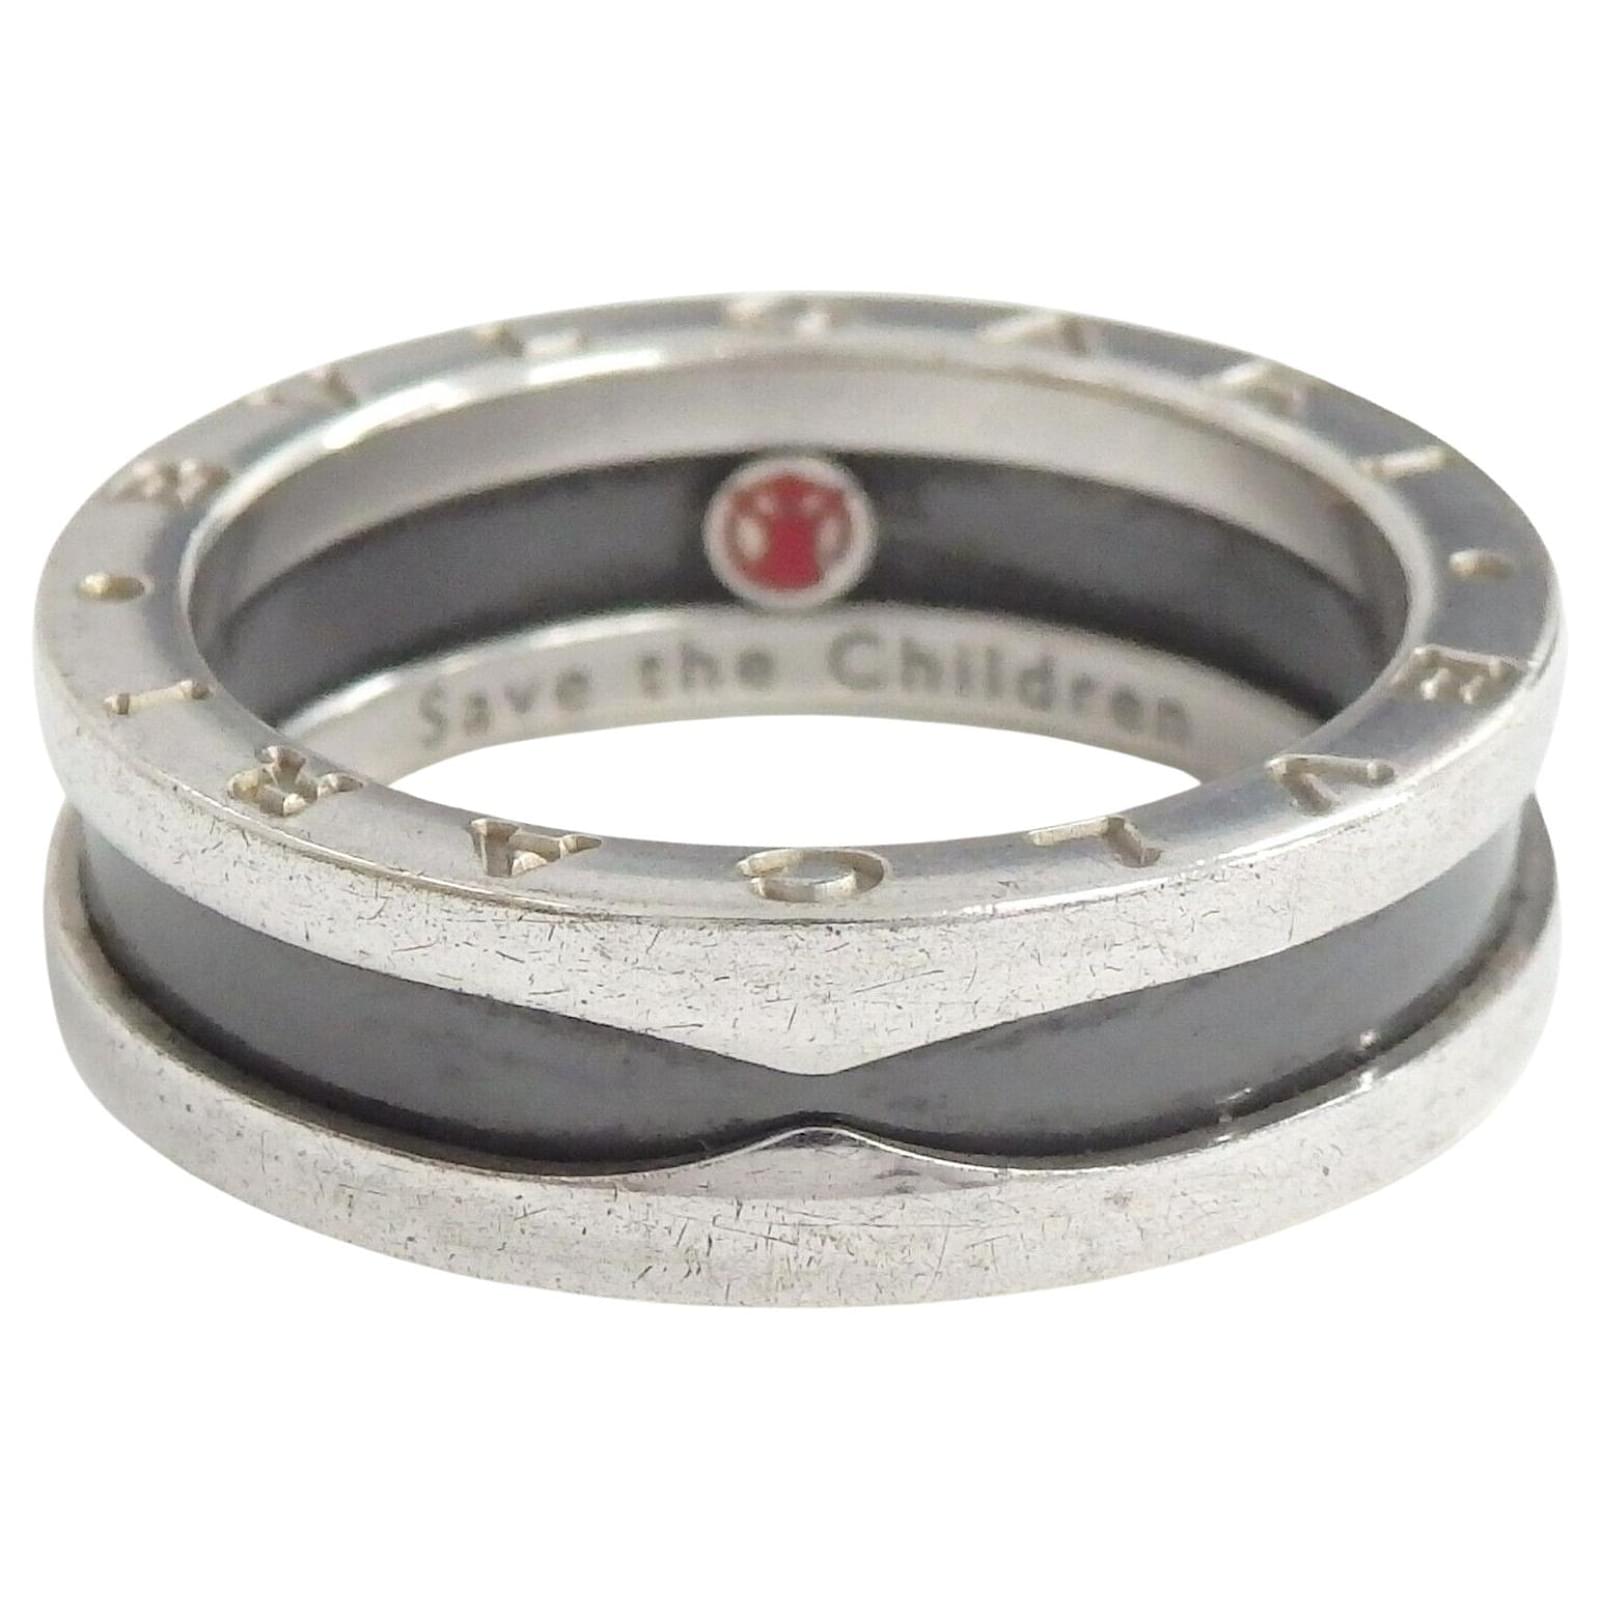 Bvlgari Save the Children Black Ceramic Band in Sterling Silver